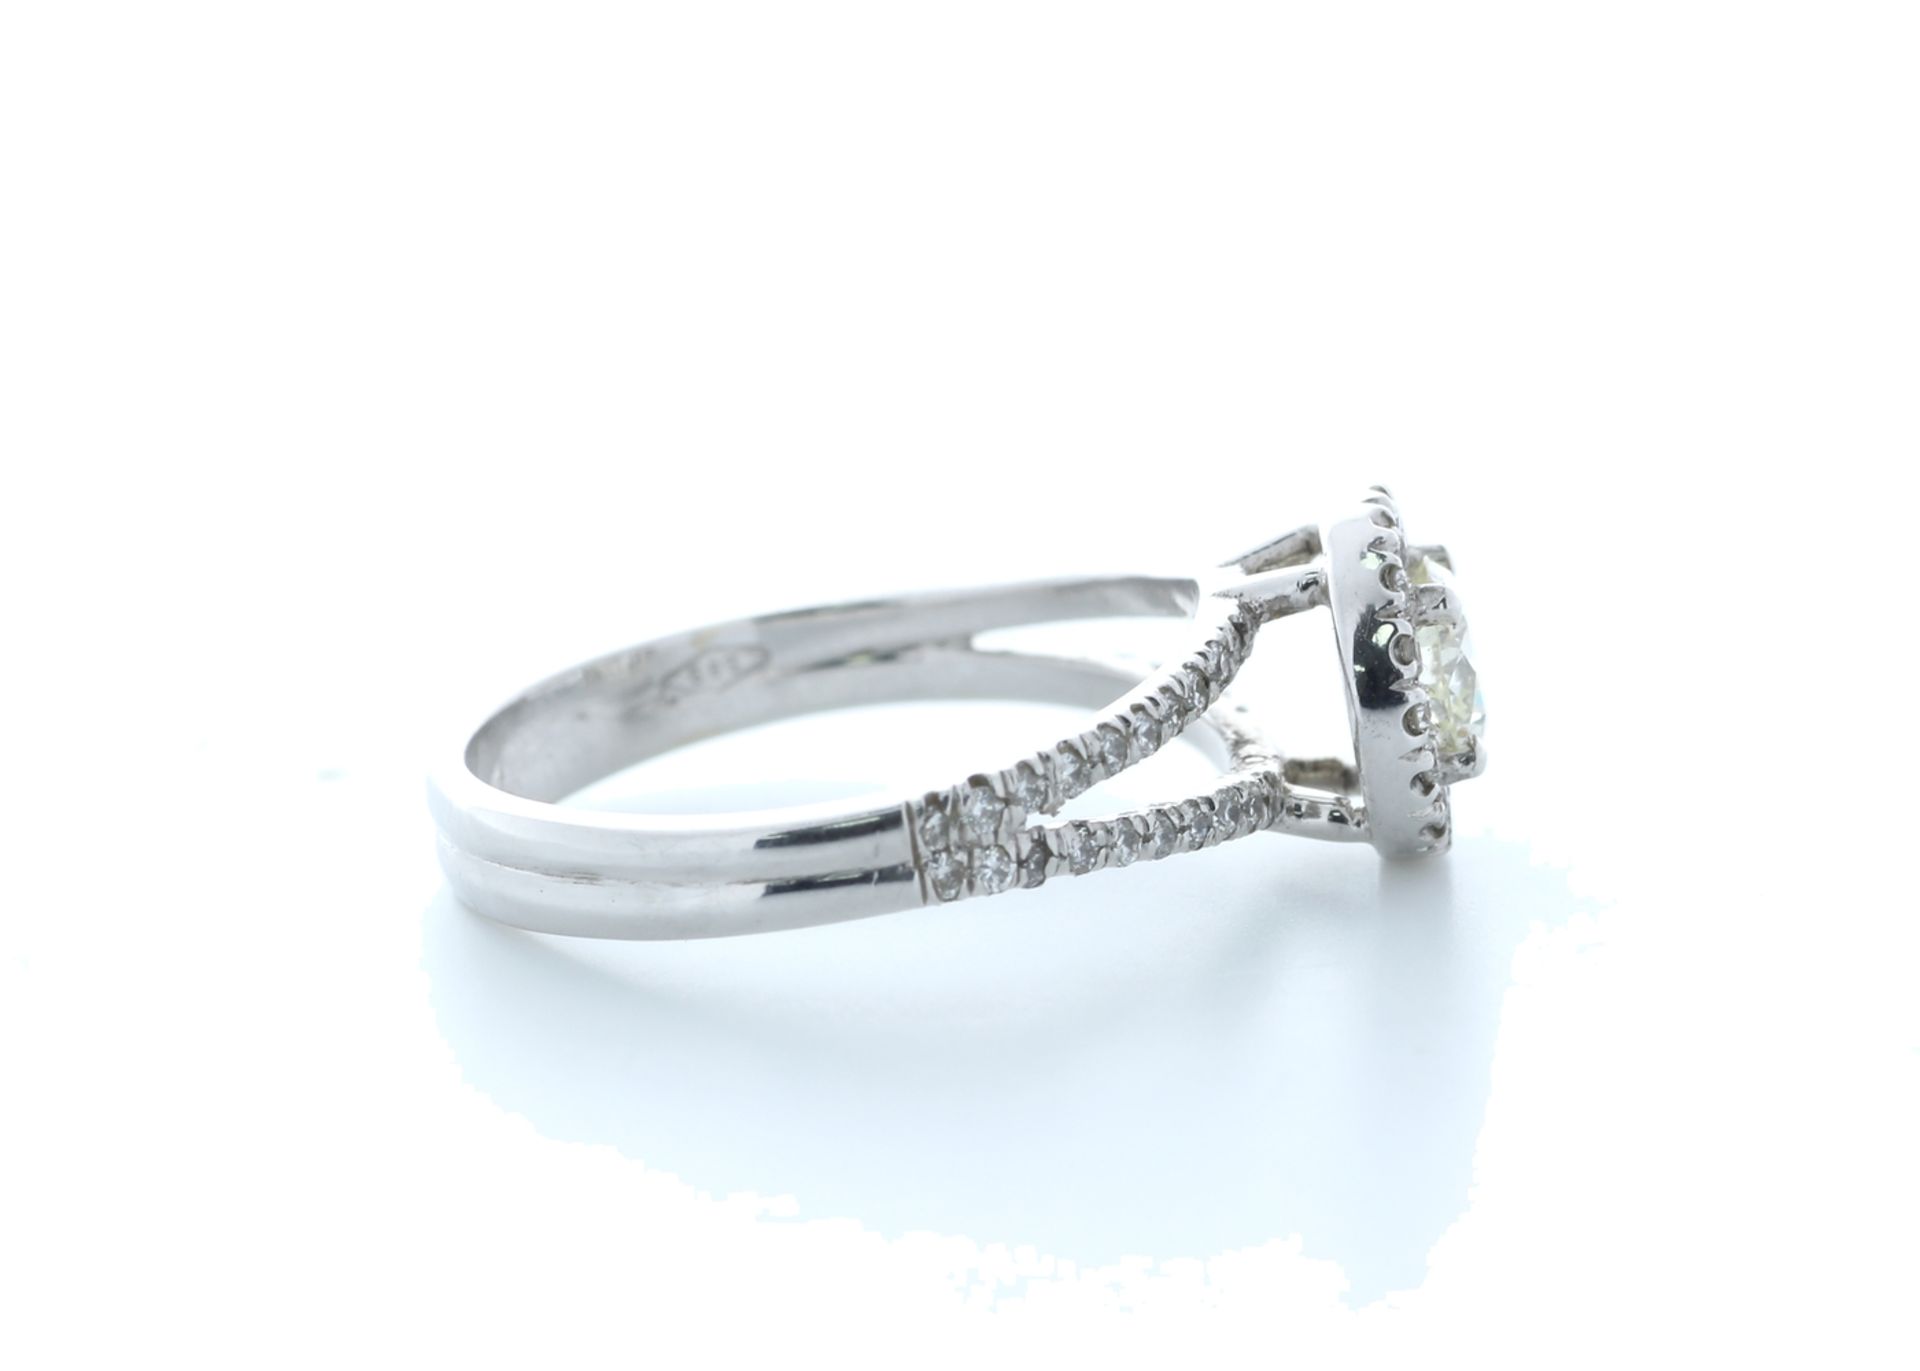 18ct White Gold Single Stone With Halo Setting Ring 0.78 (0.45) Carats - Valued by IDI £4,950.00 - - Image 4 of 5